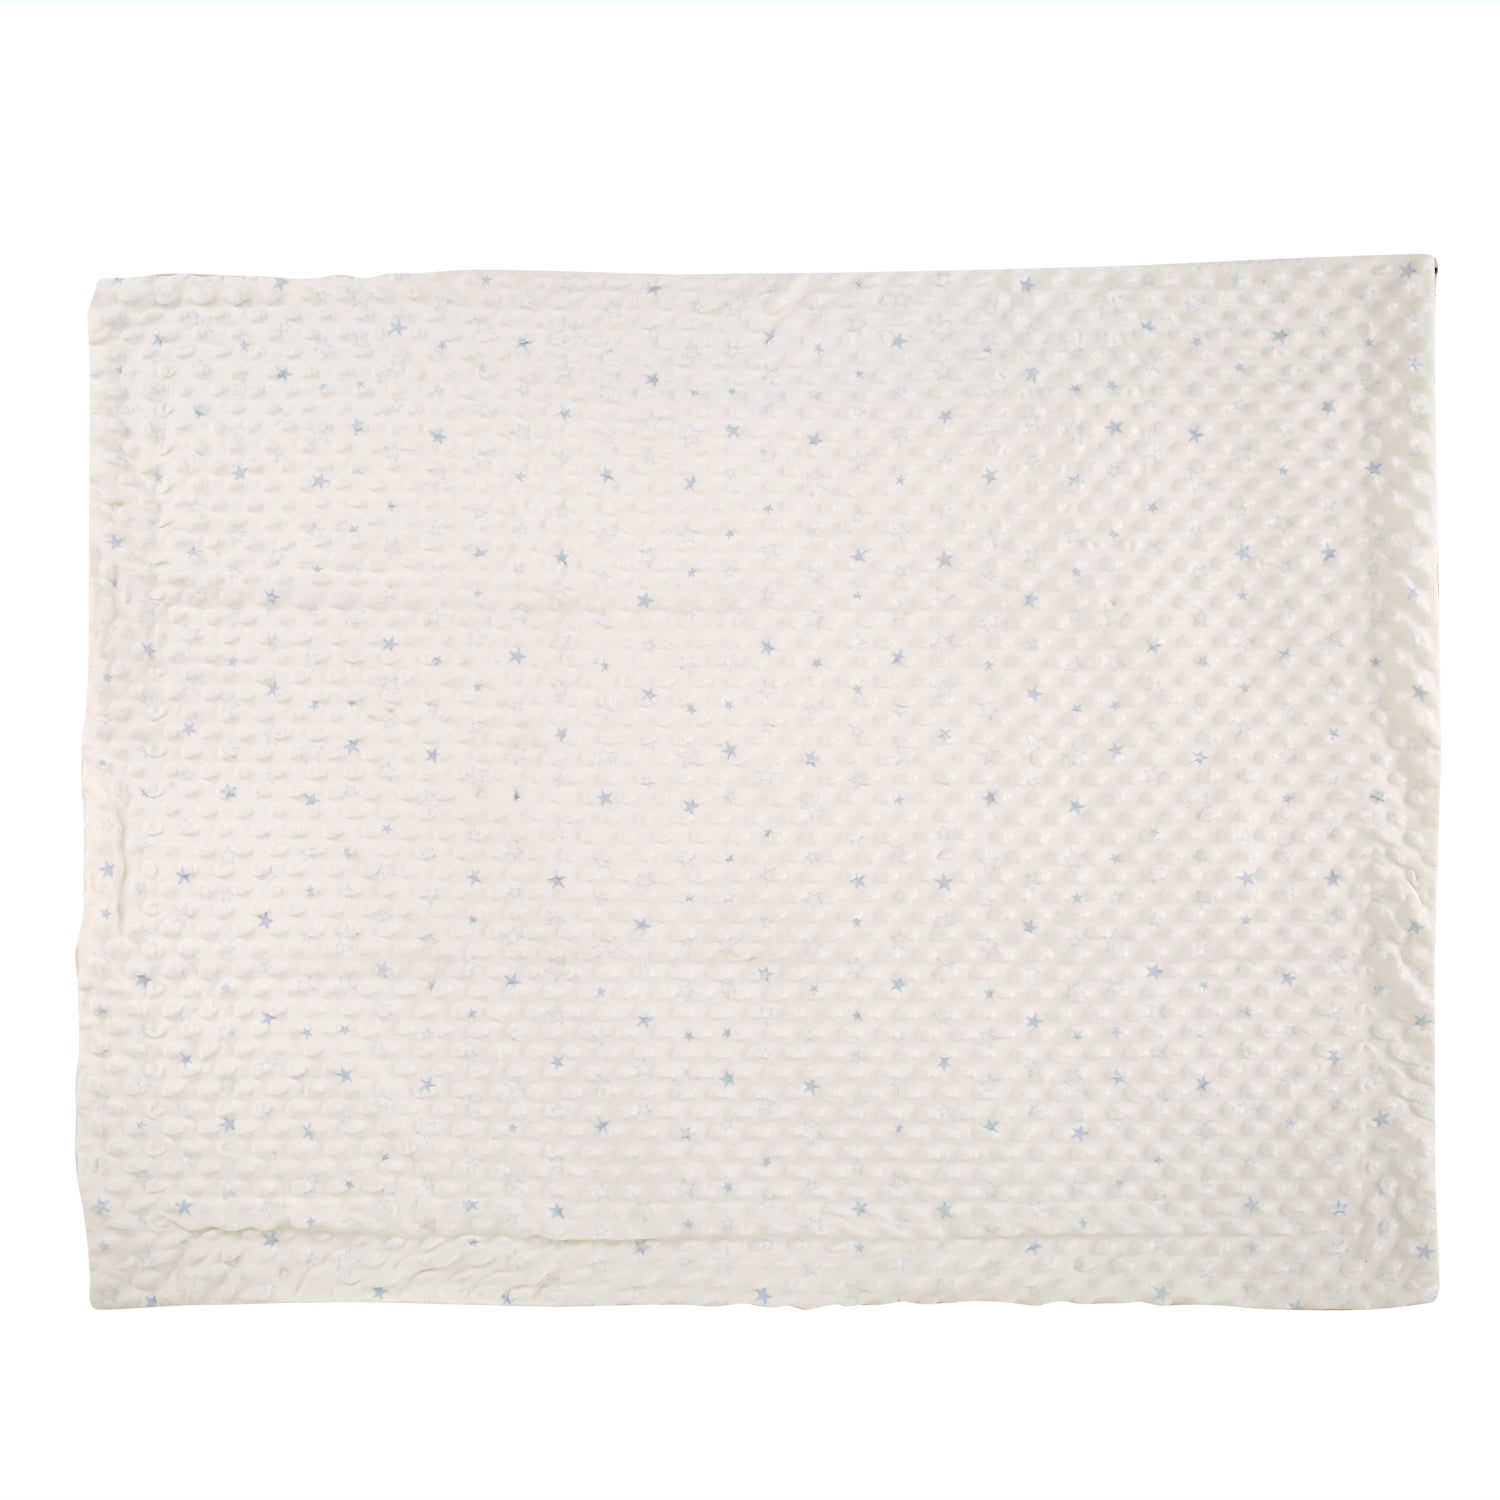 Star Off White And Blue Bubble Blanket - Baby Moo